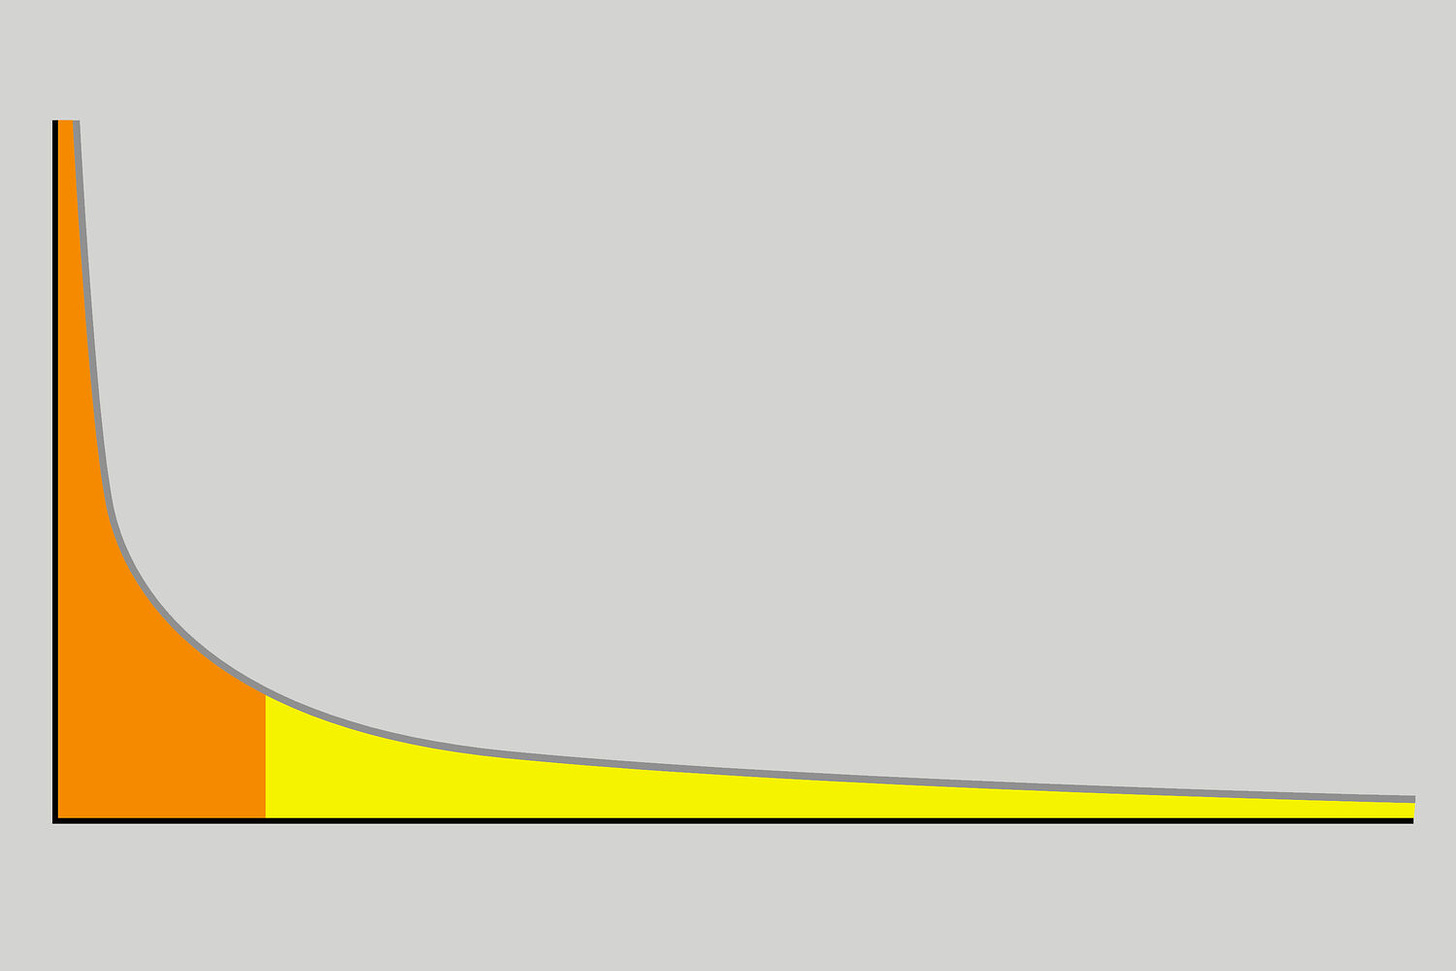 An example power law graph that demonstrates ranking of popularity. To the right is the long tail.  Public domain image.